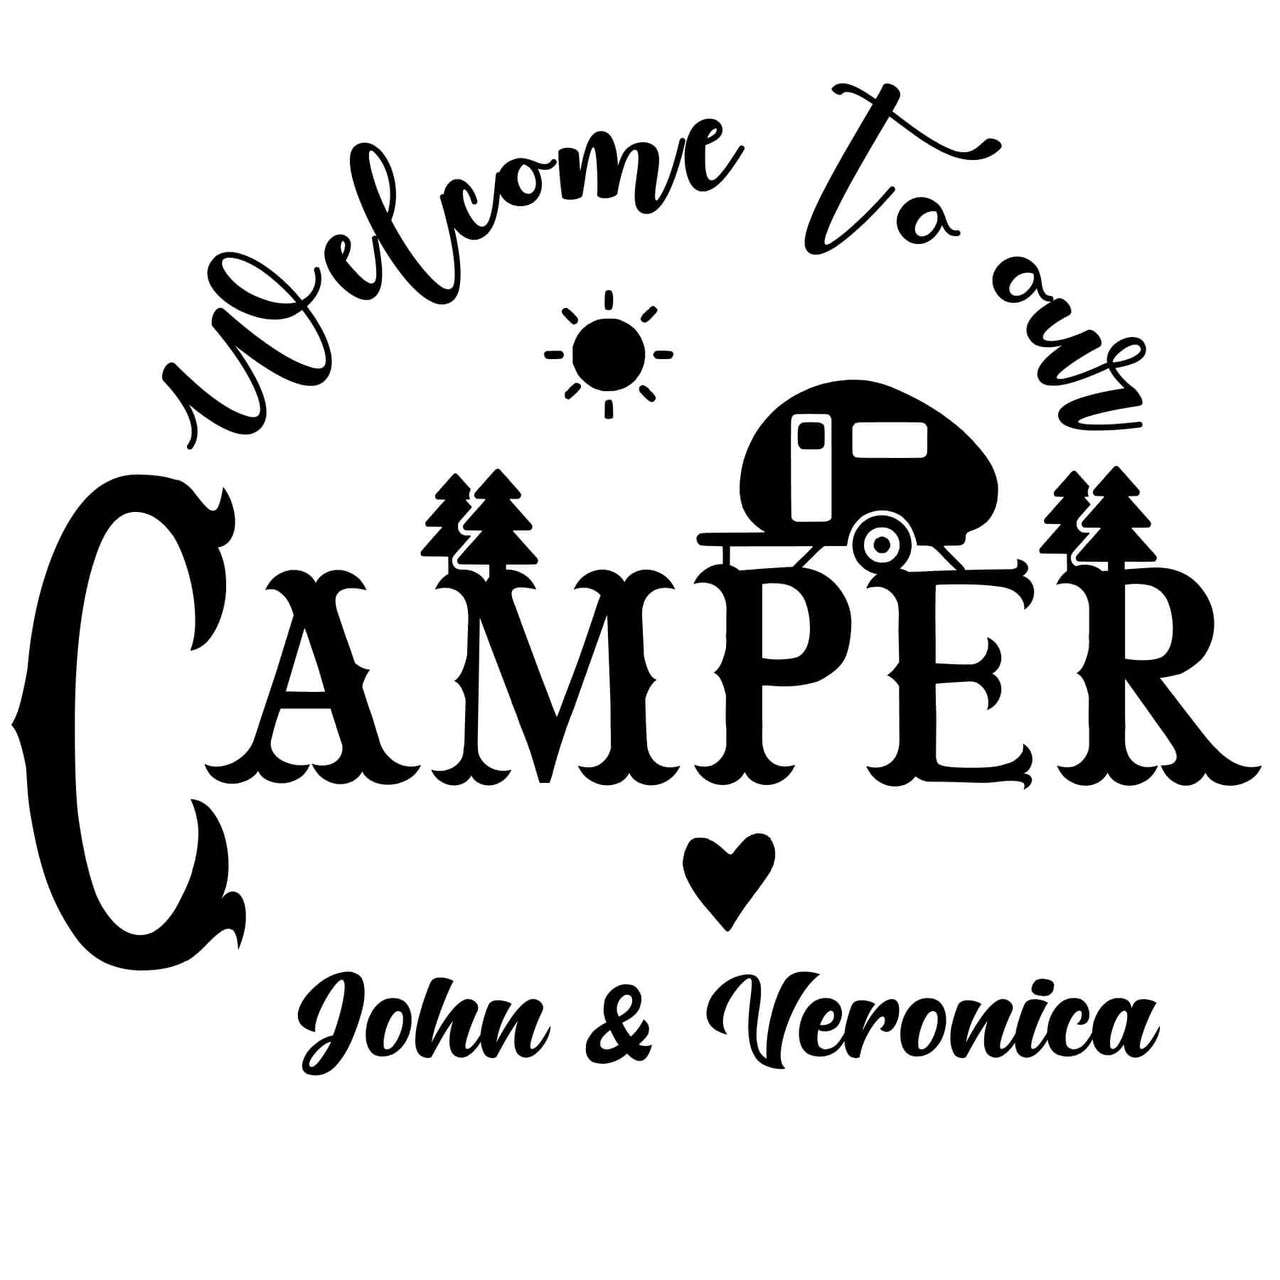 Welcome to Our Camper Personalized Decal RV Custom Permanent Outdoor Vinyl